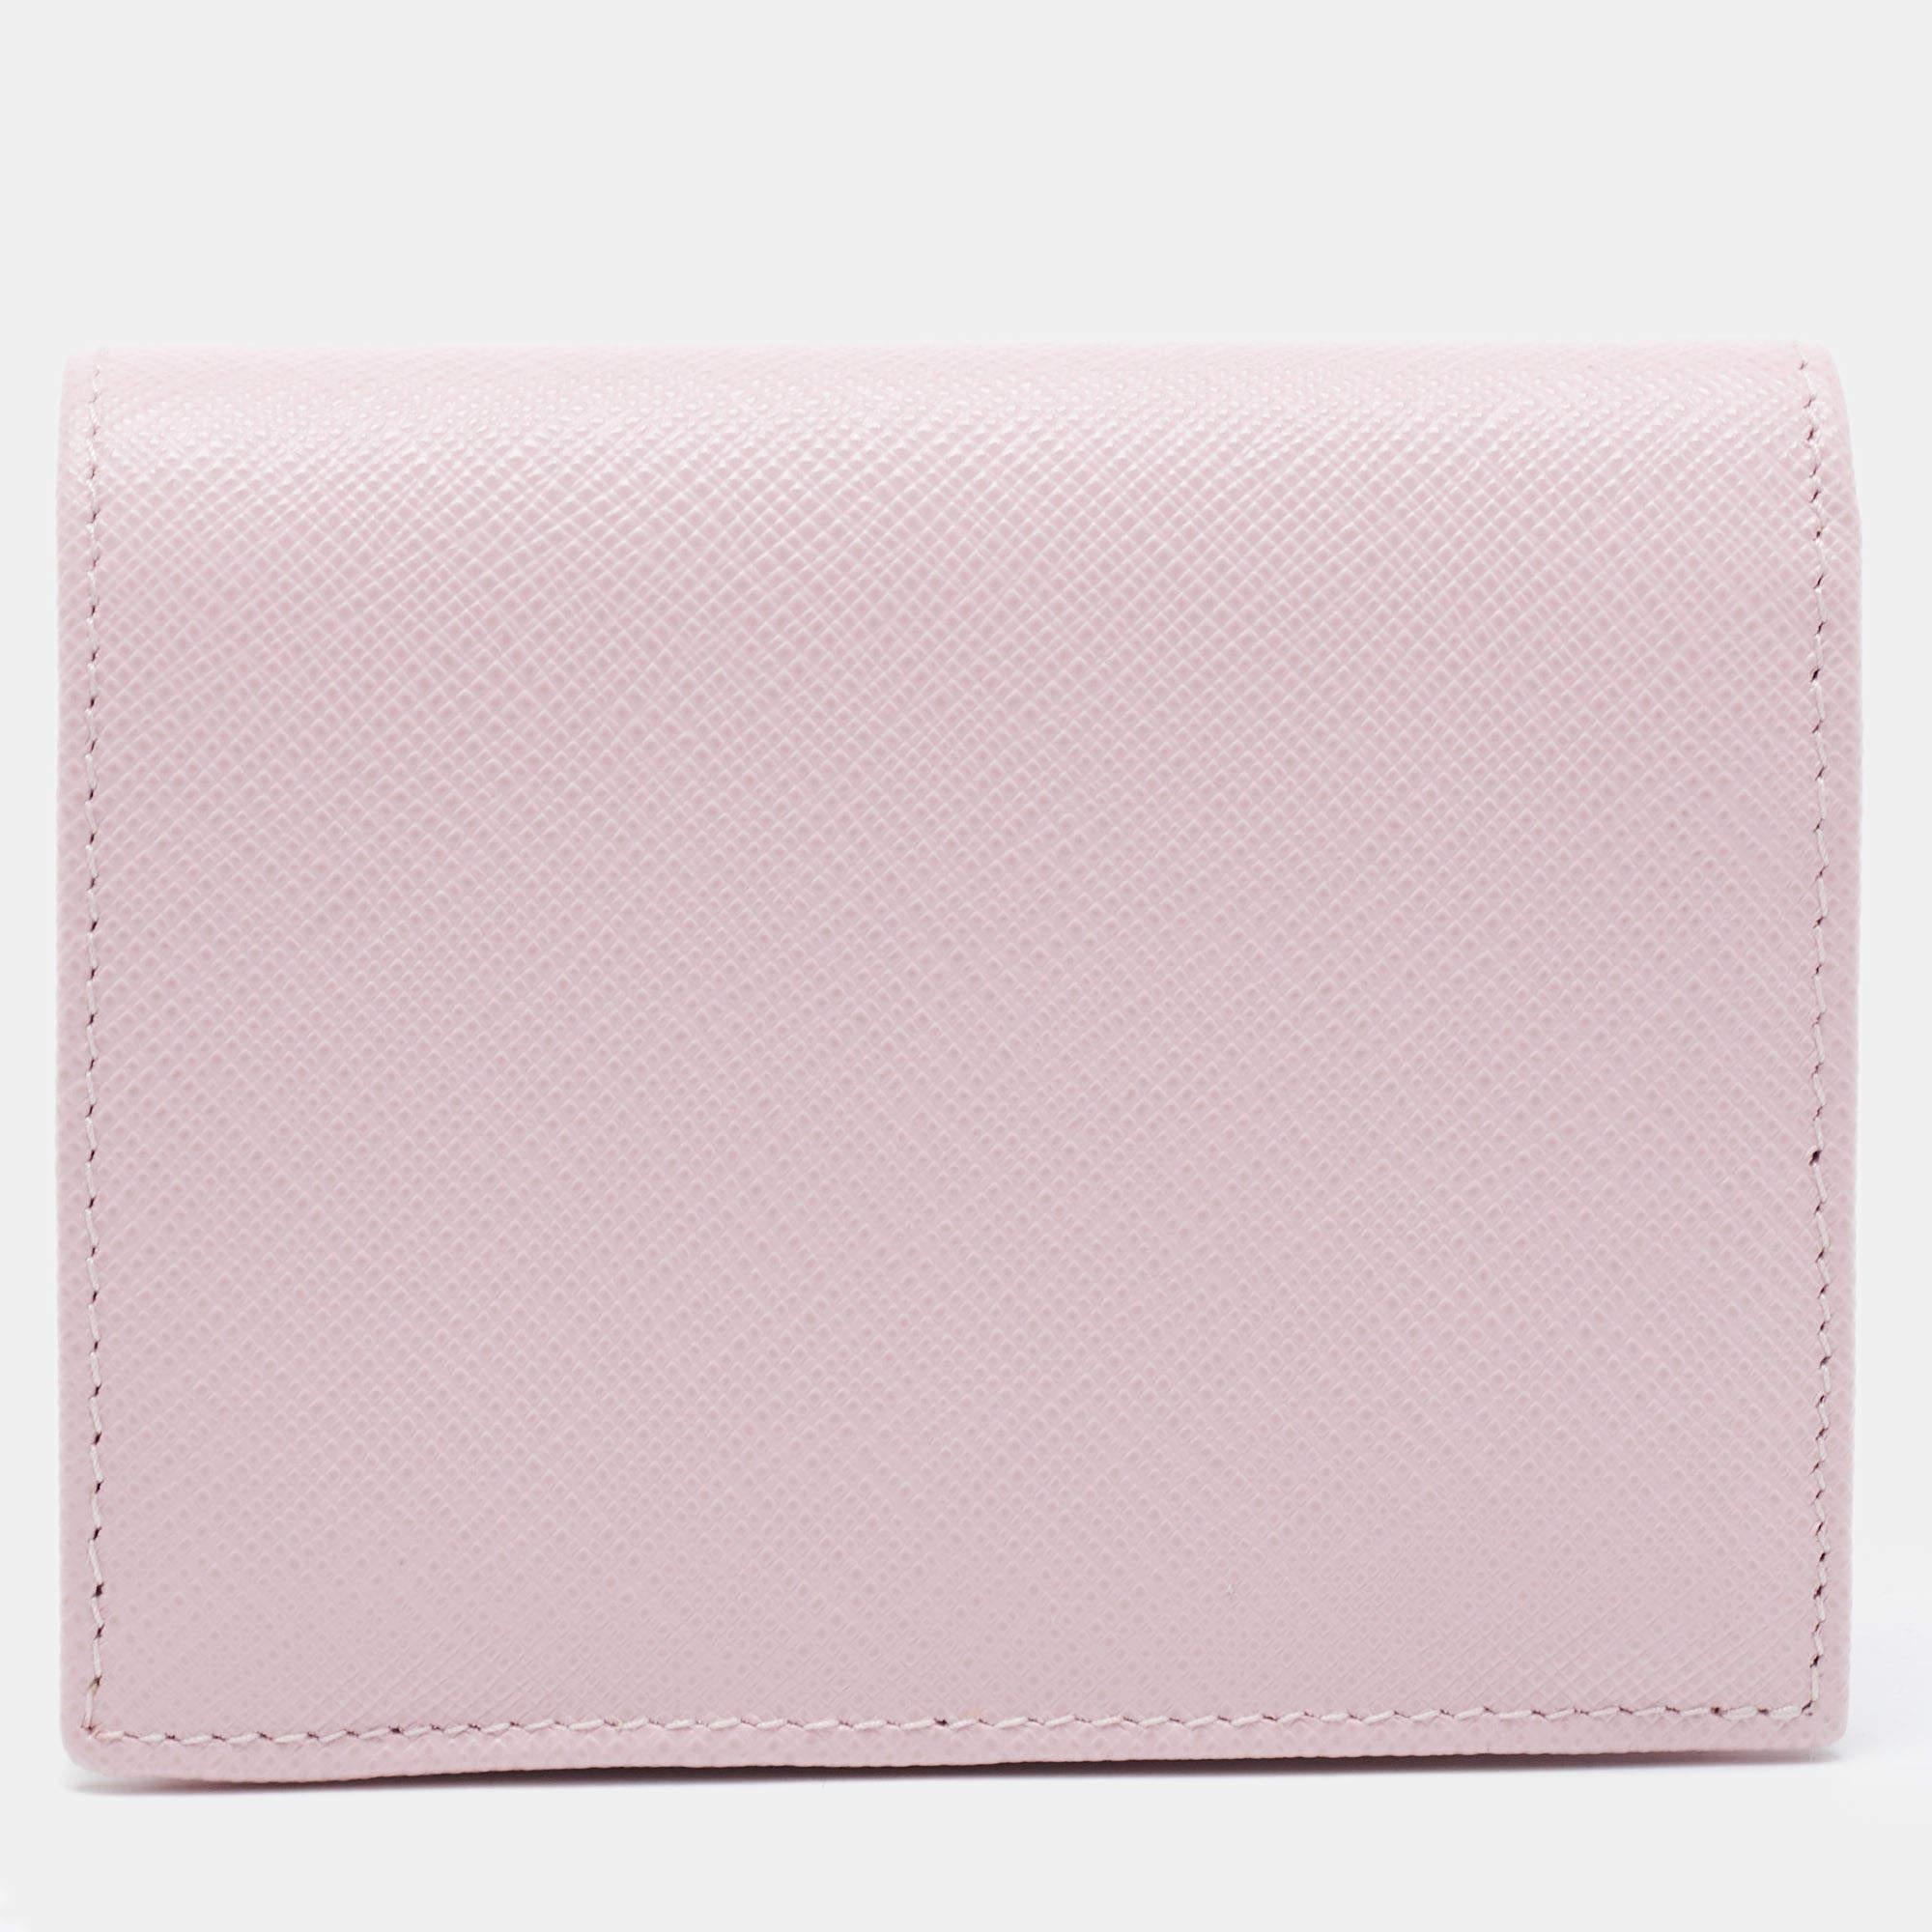 This designer wallet is an immaculate balance of sophistication and rational utility. It has been designed using prime quality materials and elevated by a sleek finish. The creation is equipped with ample space for your monetary essentials.

